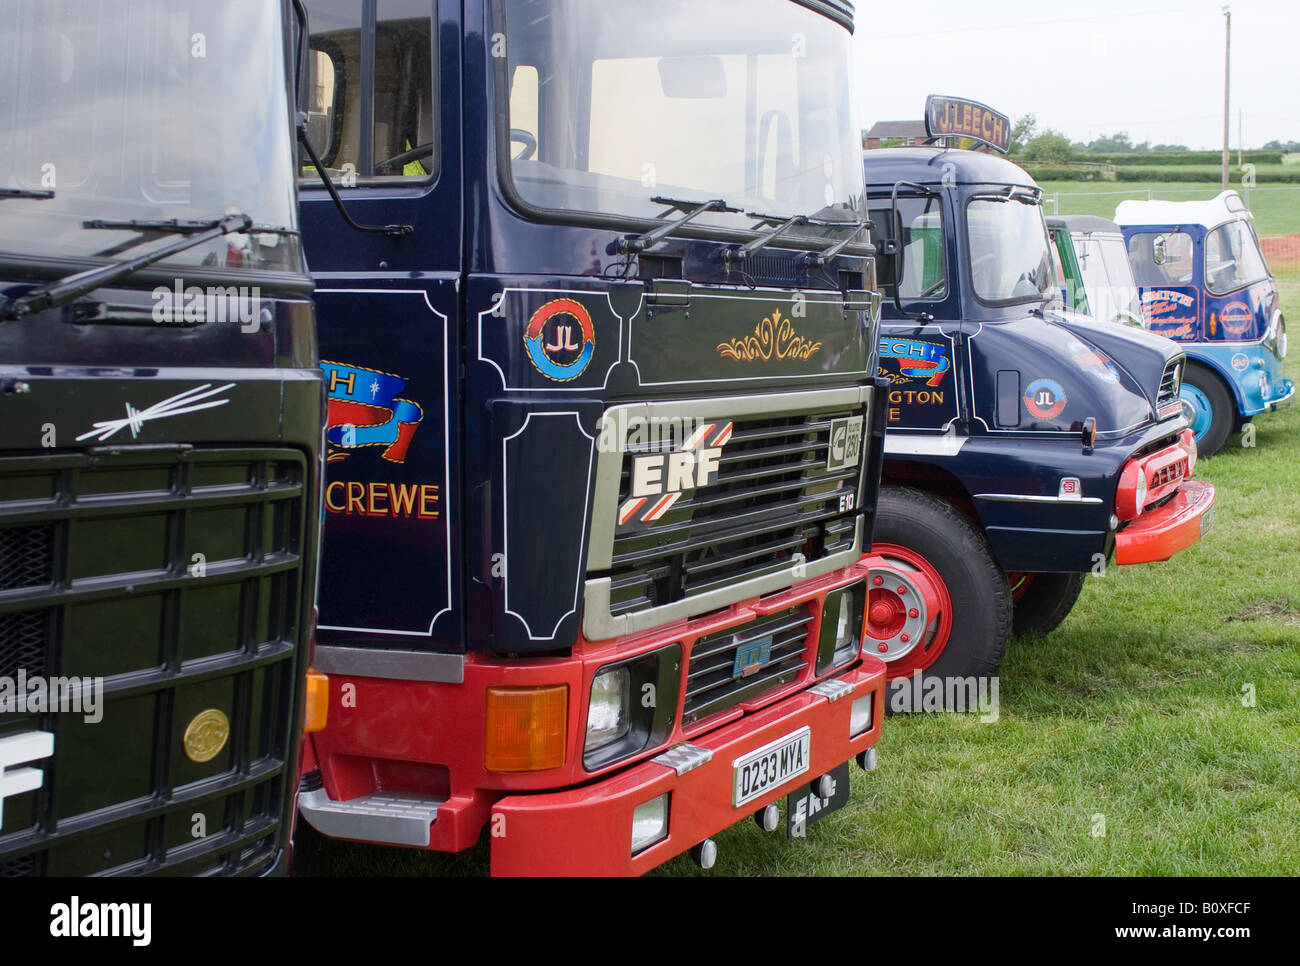 Ford Thames Truck High Resolution Stock Photography and Images - Alamy